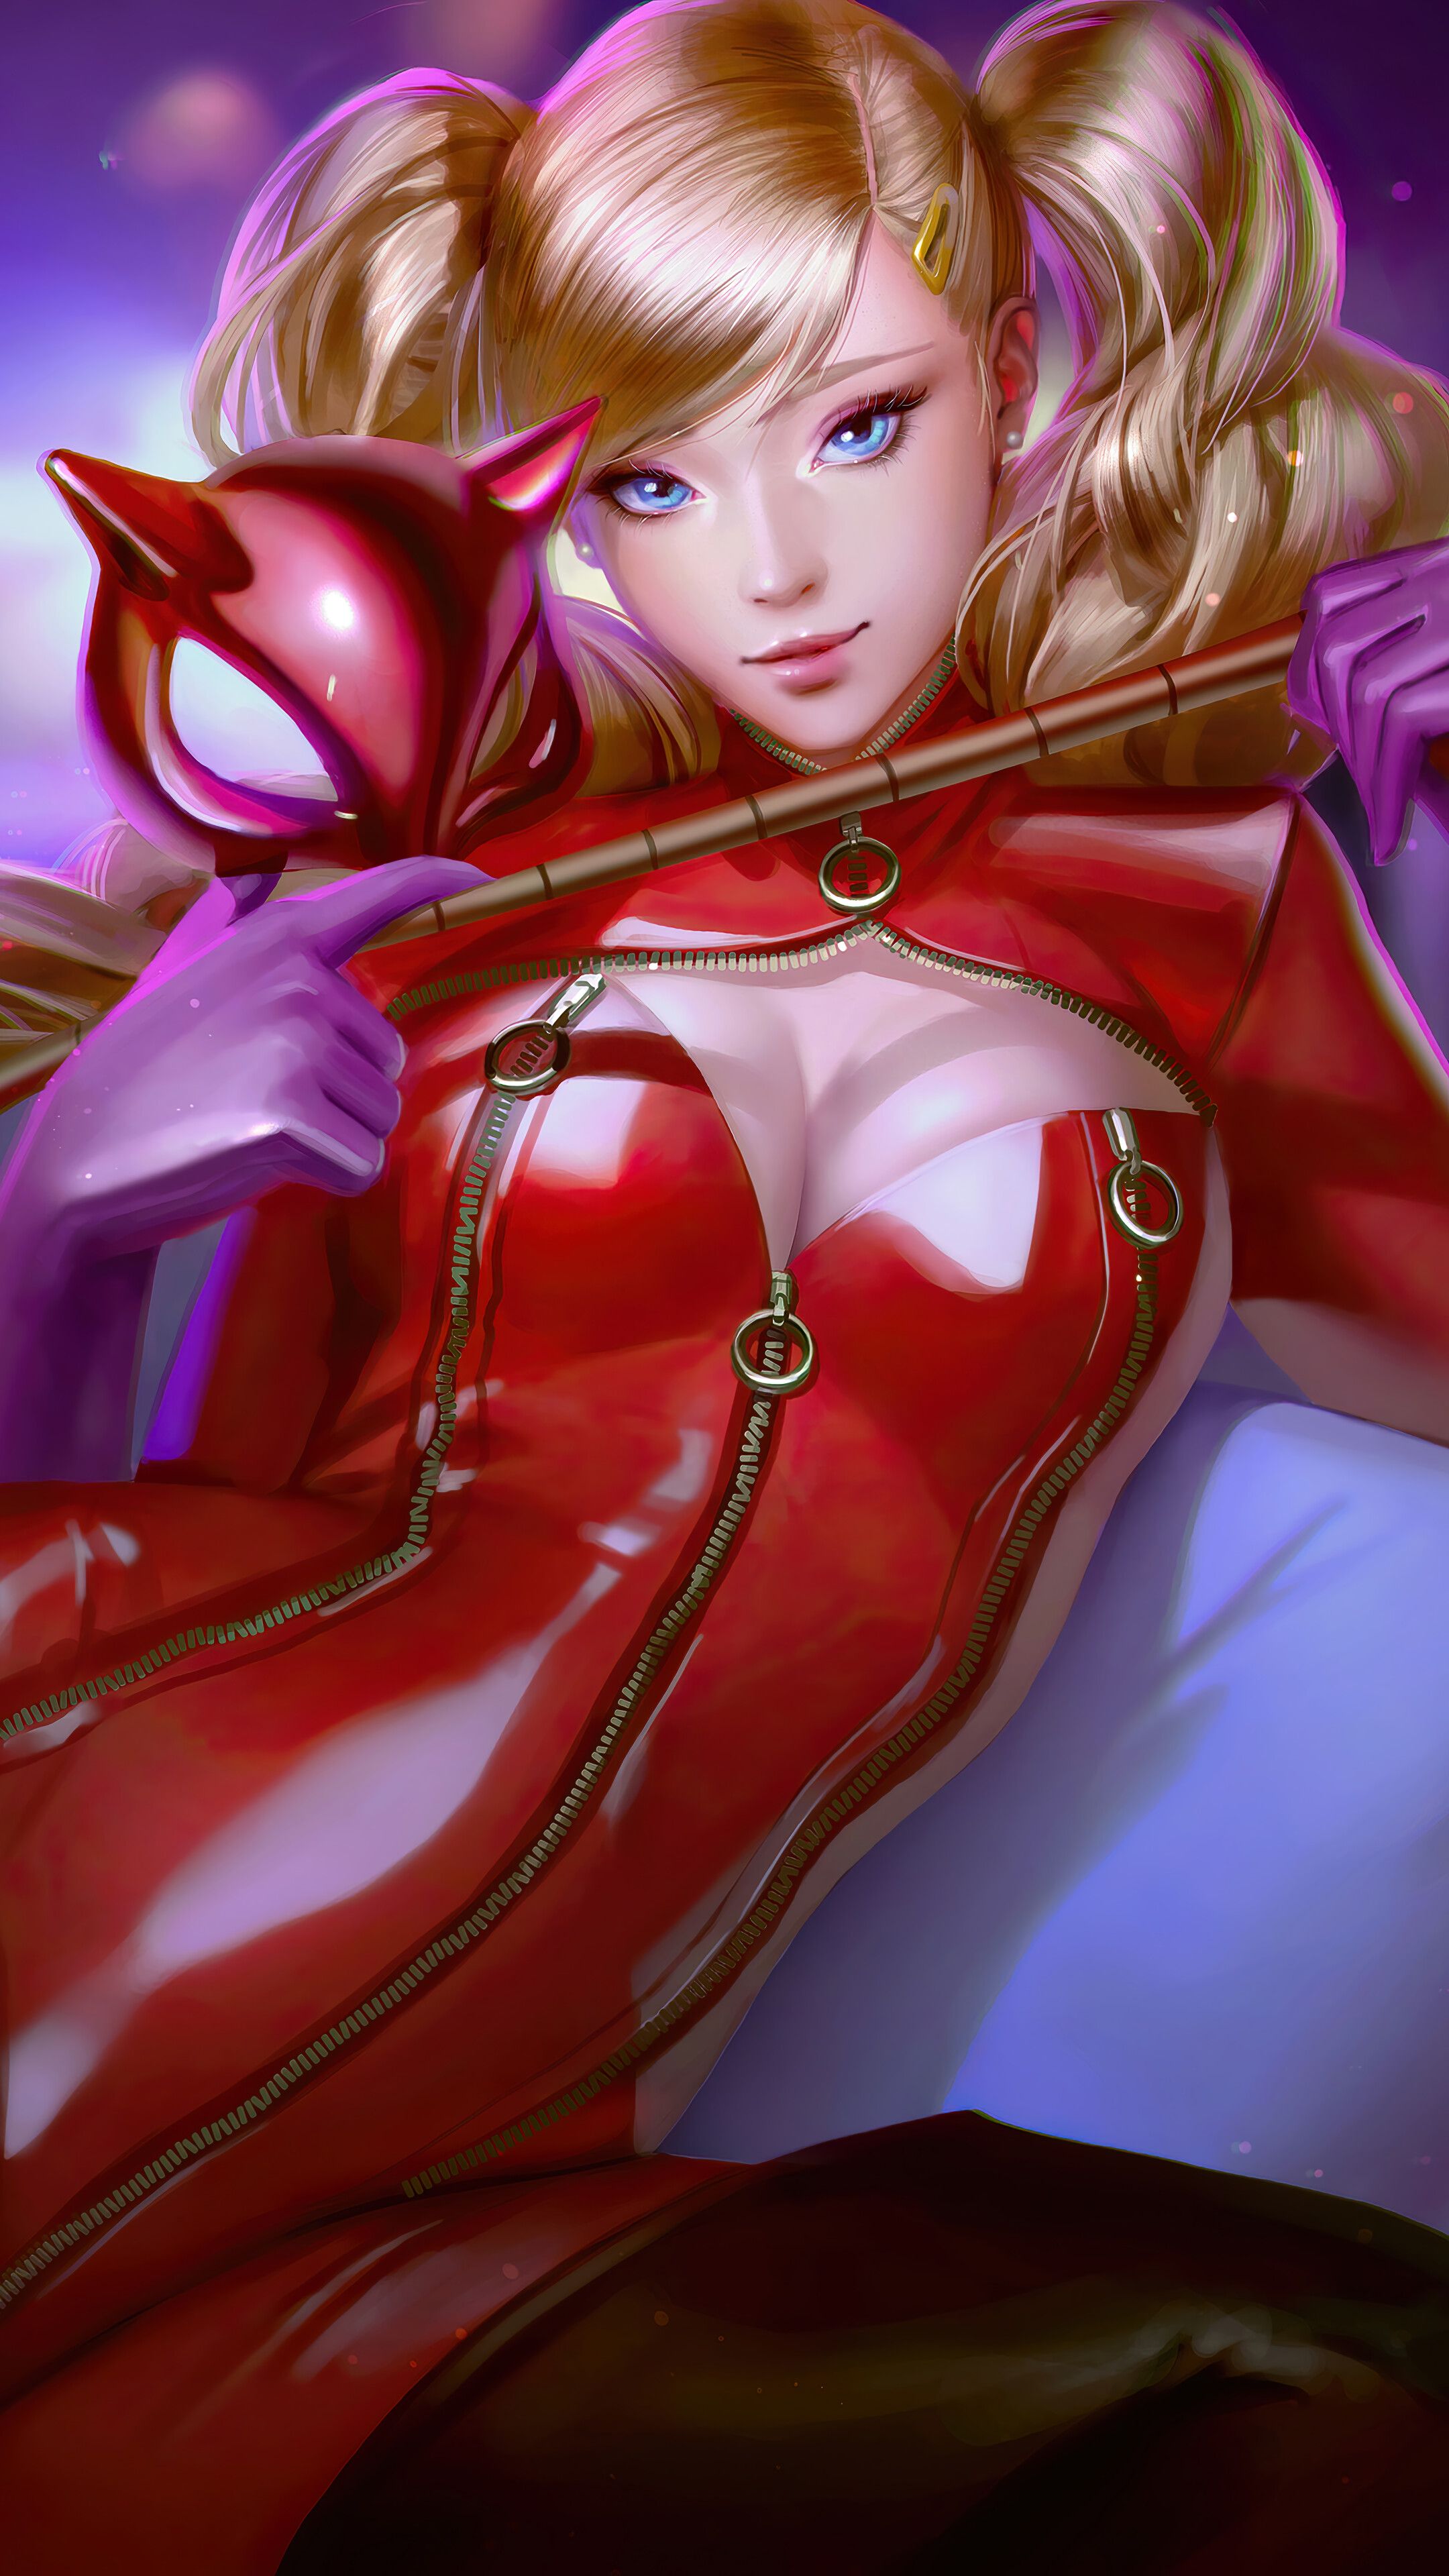 Ann Takamaki, Persona 4K phone HD Wallpaper, Image, Background, Photo and Picture. Mocah HD Wallpaper